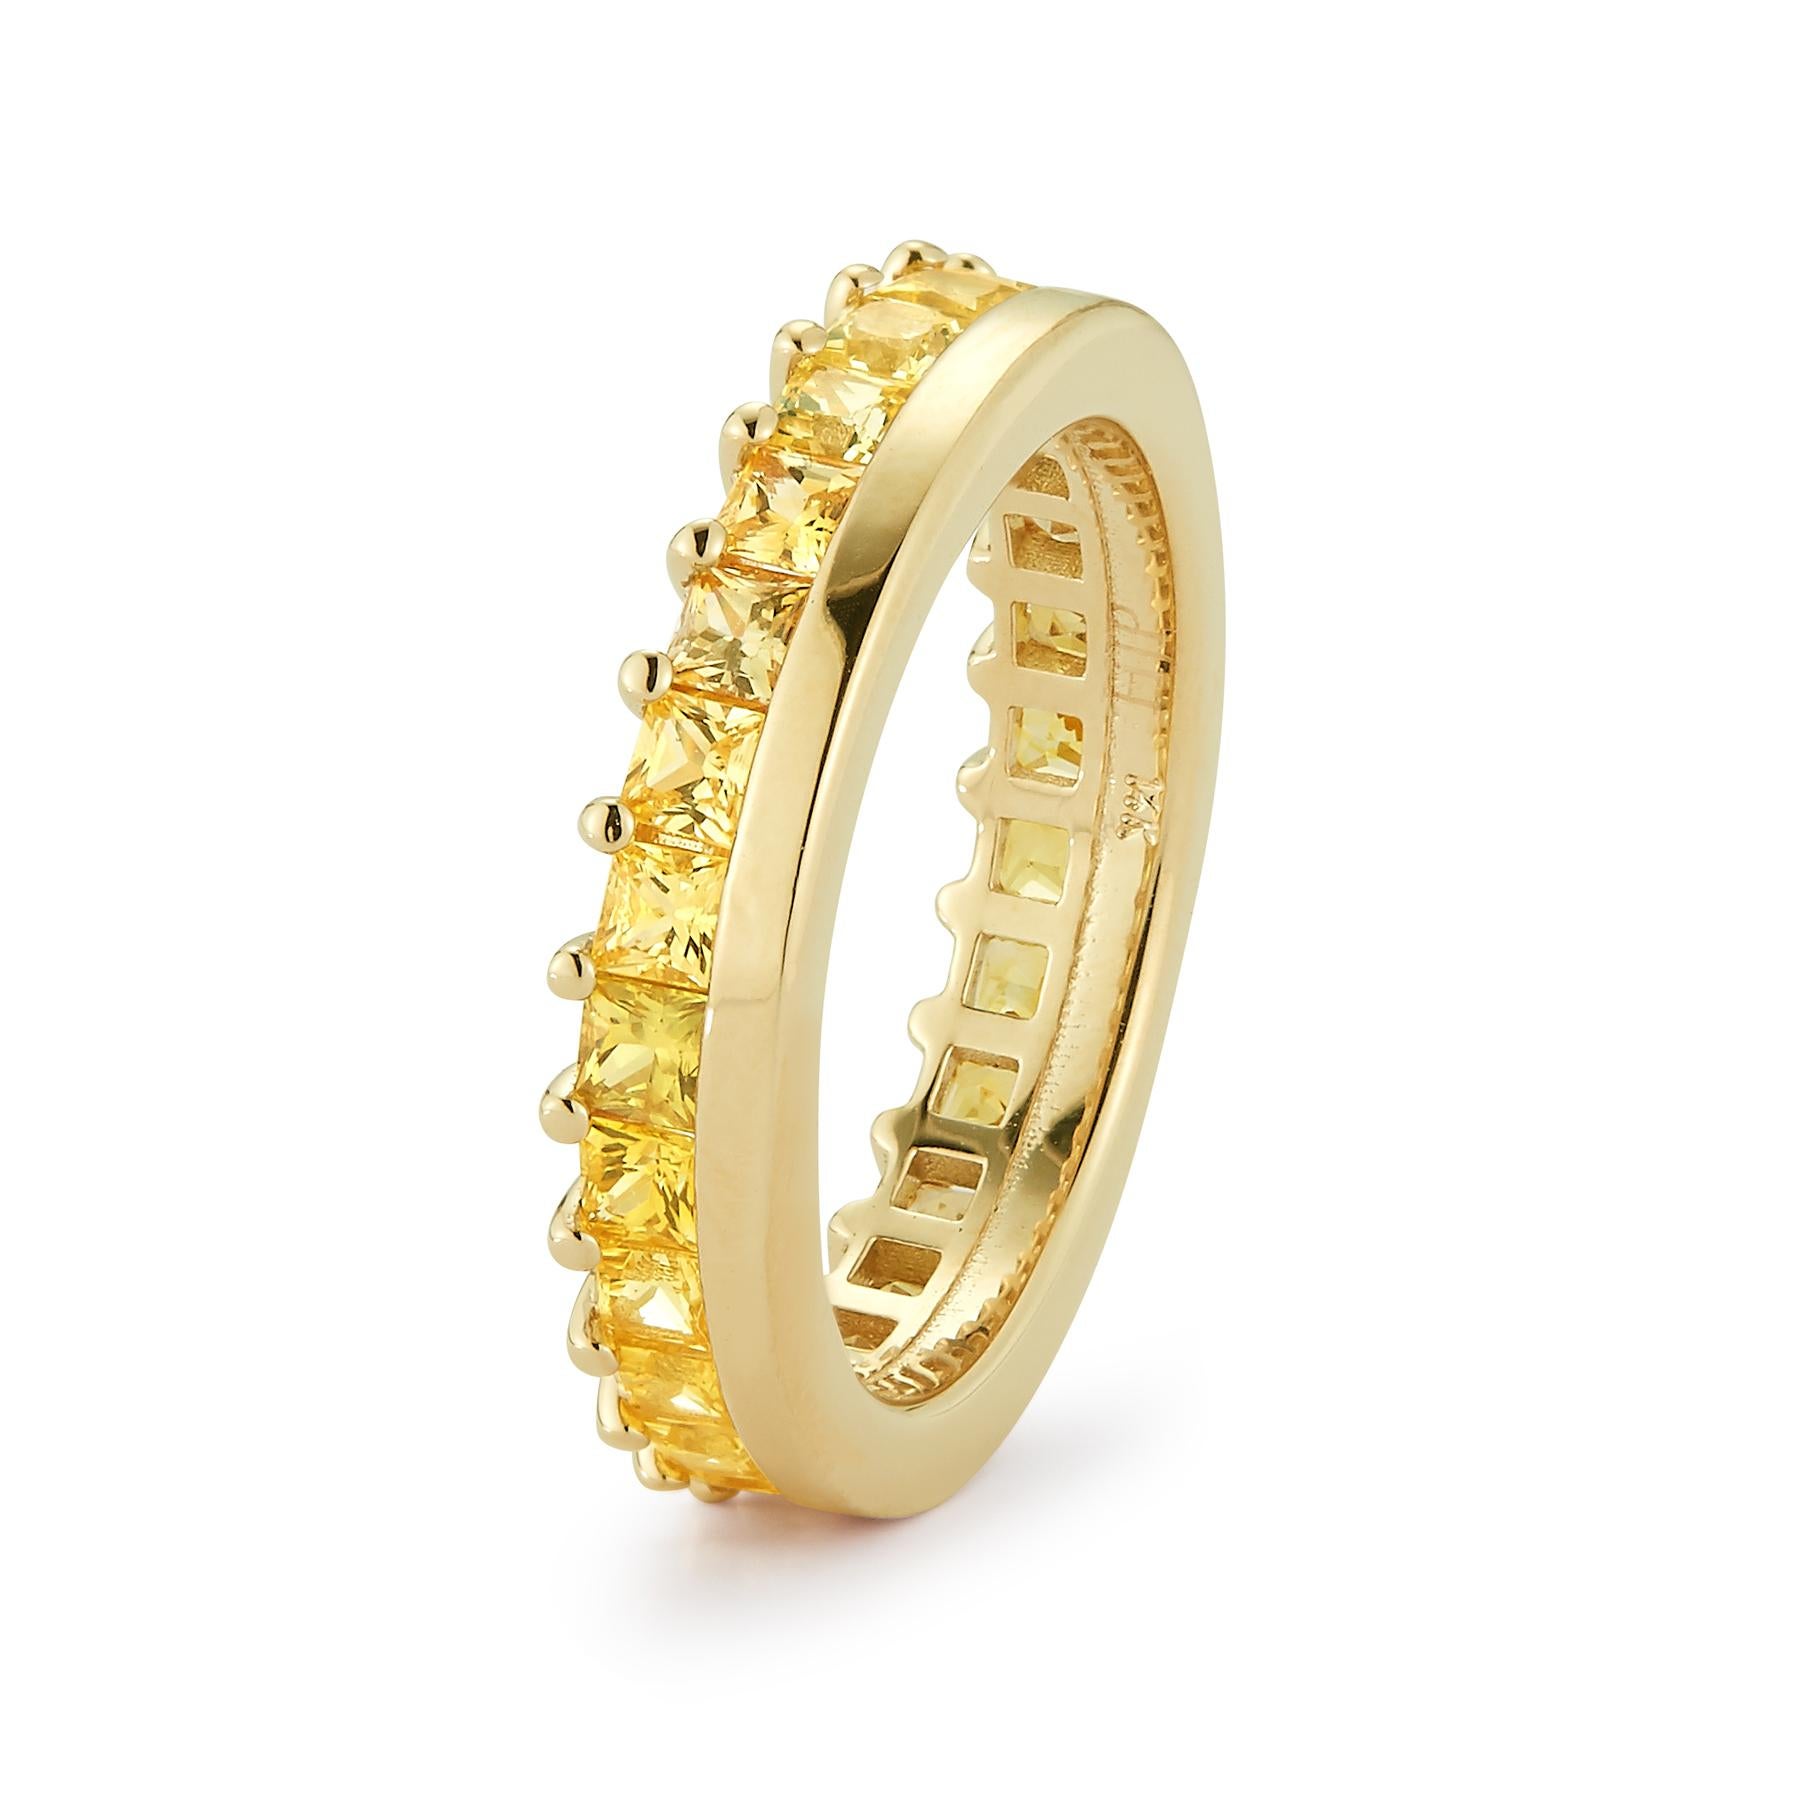 A continuous engagement or wedding eternity ring band set with 26 pieces of princess cut yellow sapphire stones. Inspired by the undefeated Mongolian warrior princess 